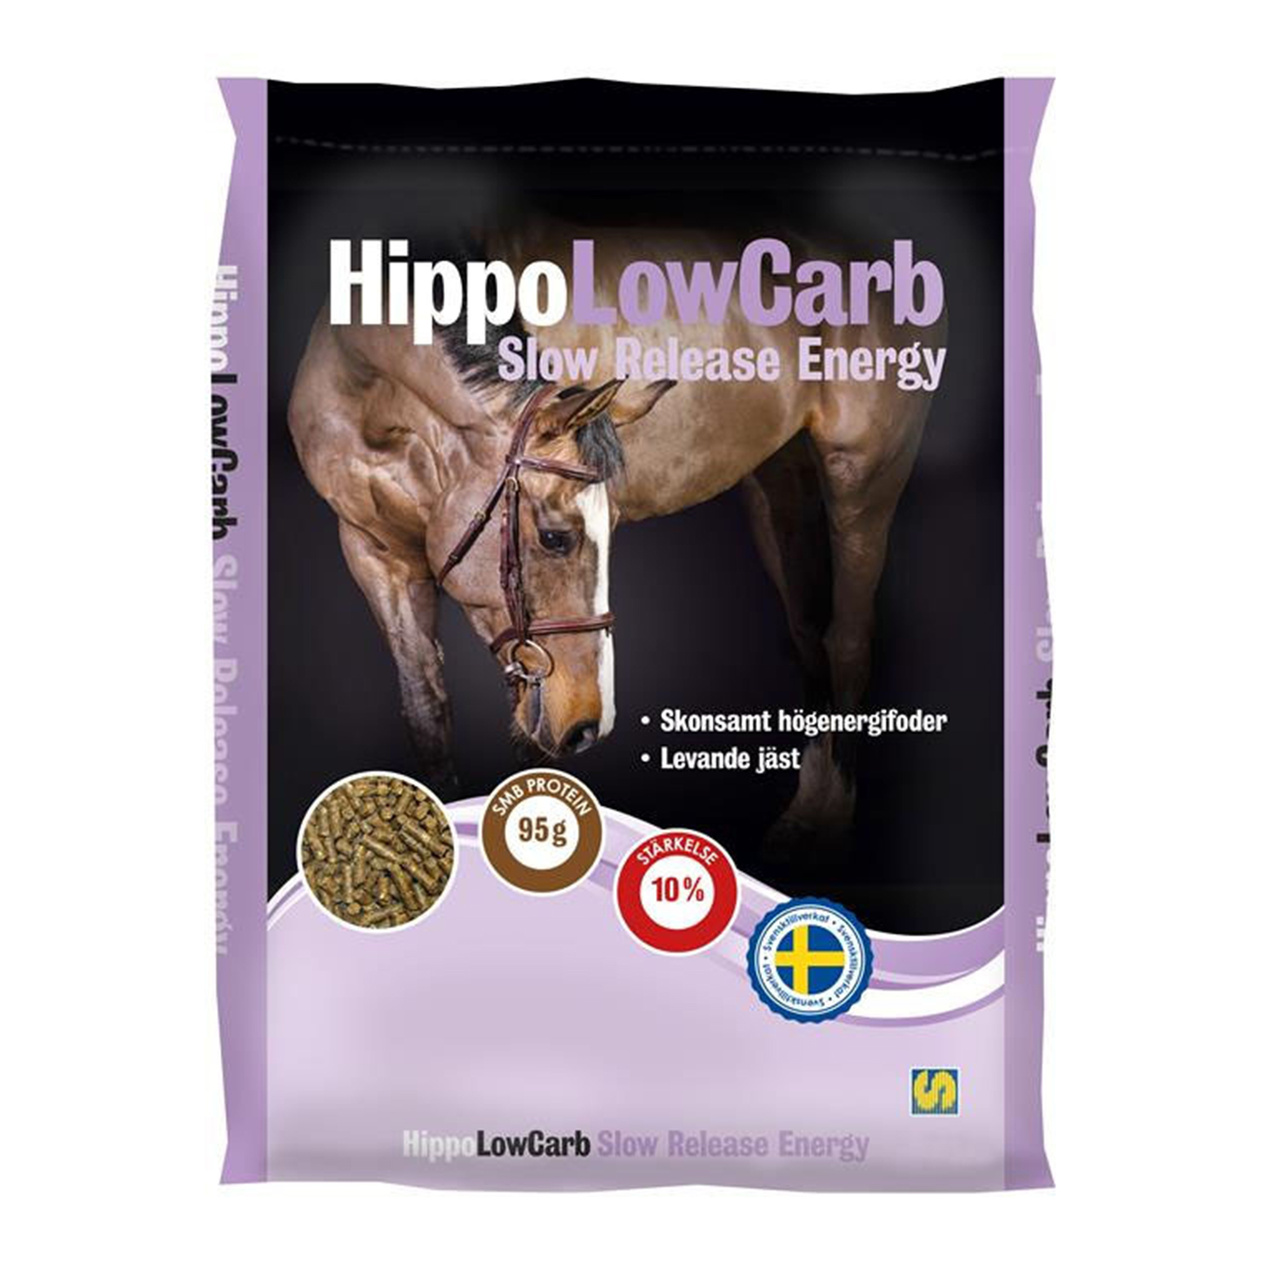 Hippo low carb slow release, 15 kg